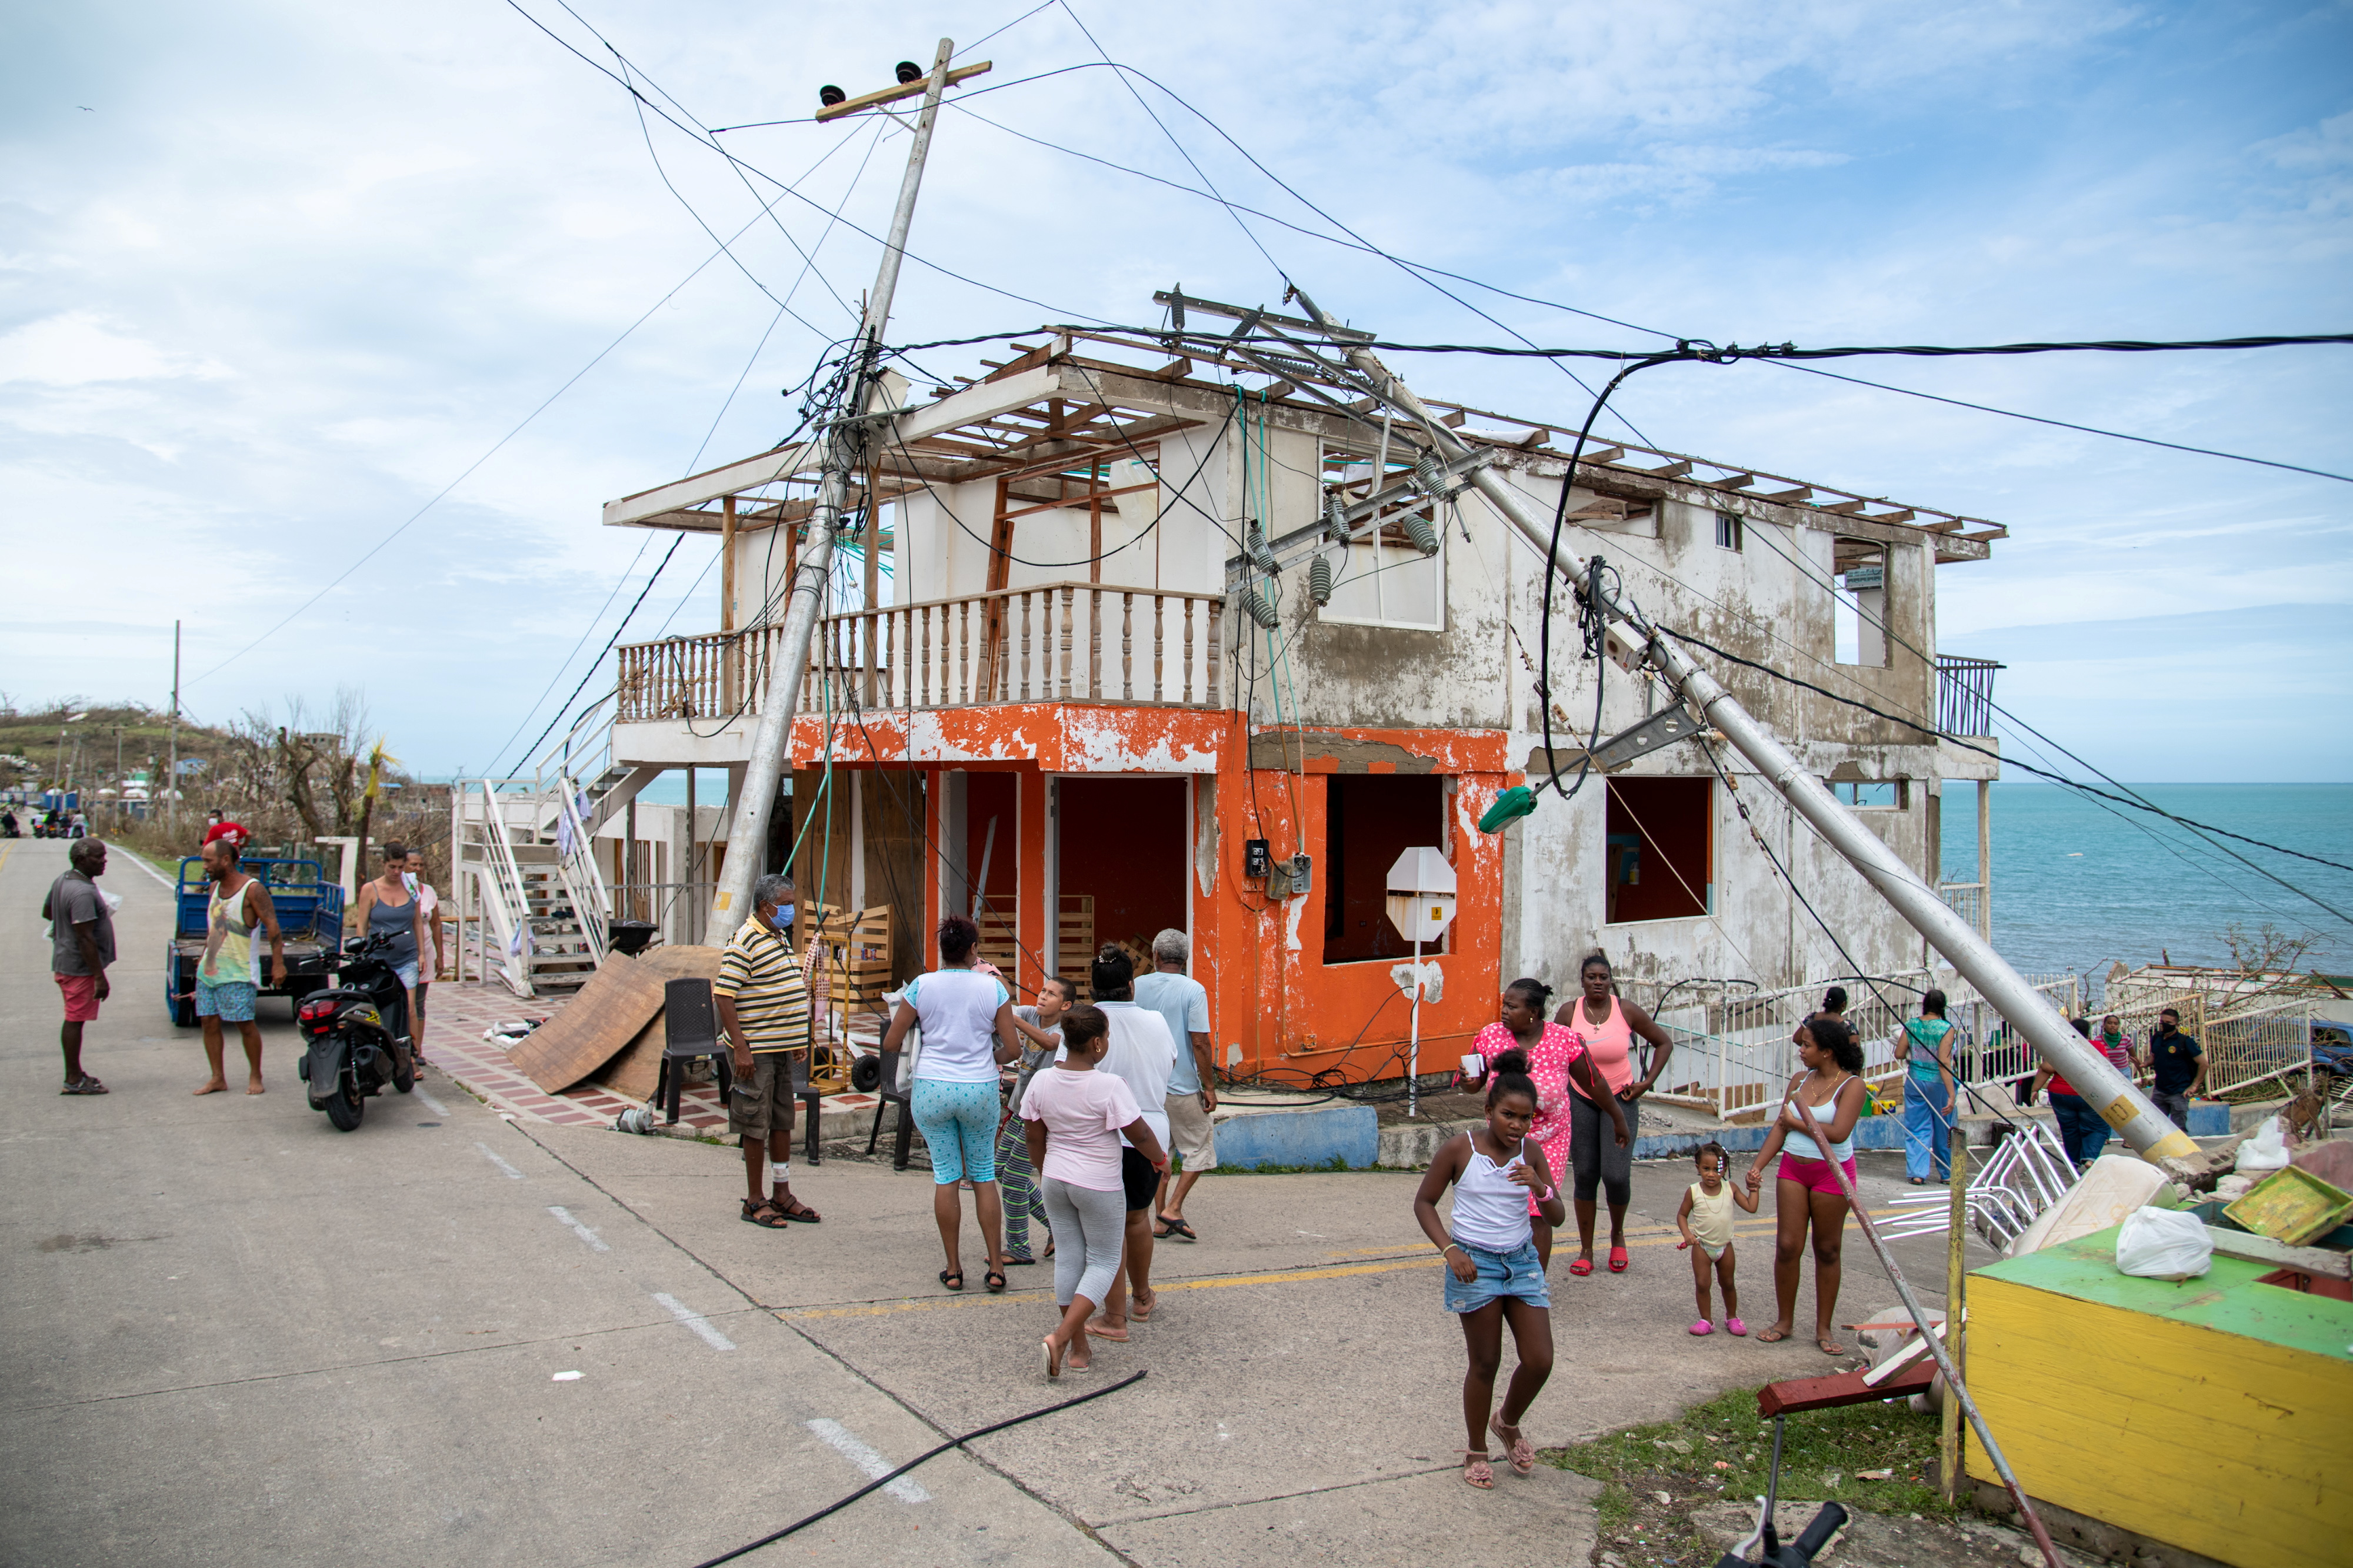 People walk near a damaged house and fallen electricity poles after the passing of Storm Iota, in Providencia, Colombia November 17, 2020. Picture taken November 17, 2020. Efrain Herrera/Colombia Presidency/Handout via REUTERS   ATTENTION EDITORS - THIS IMAGE HAS BEEN SUPPLIED BY A THIRD PARTY. NO RESALES. NO ARCHIVES.